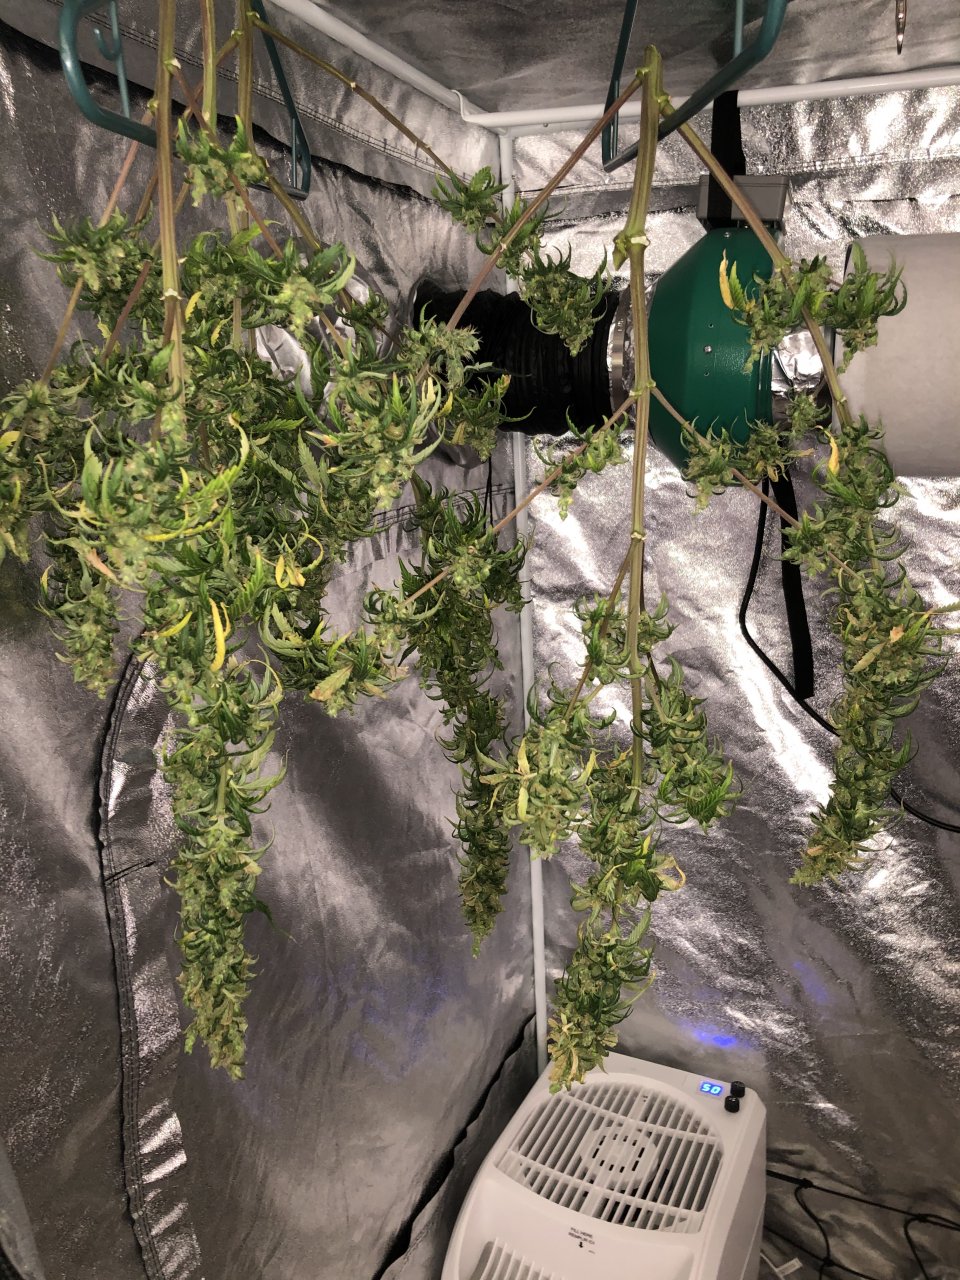 Harvested Today - Week 9